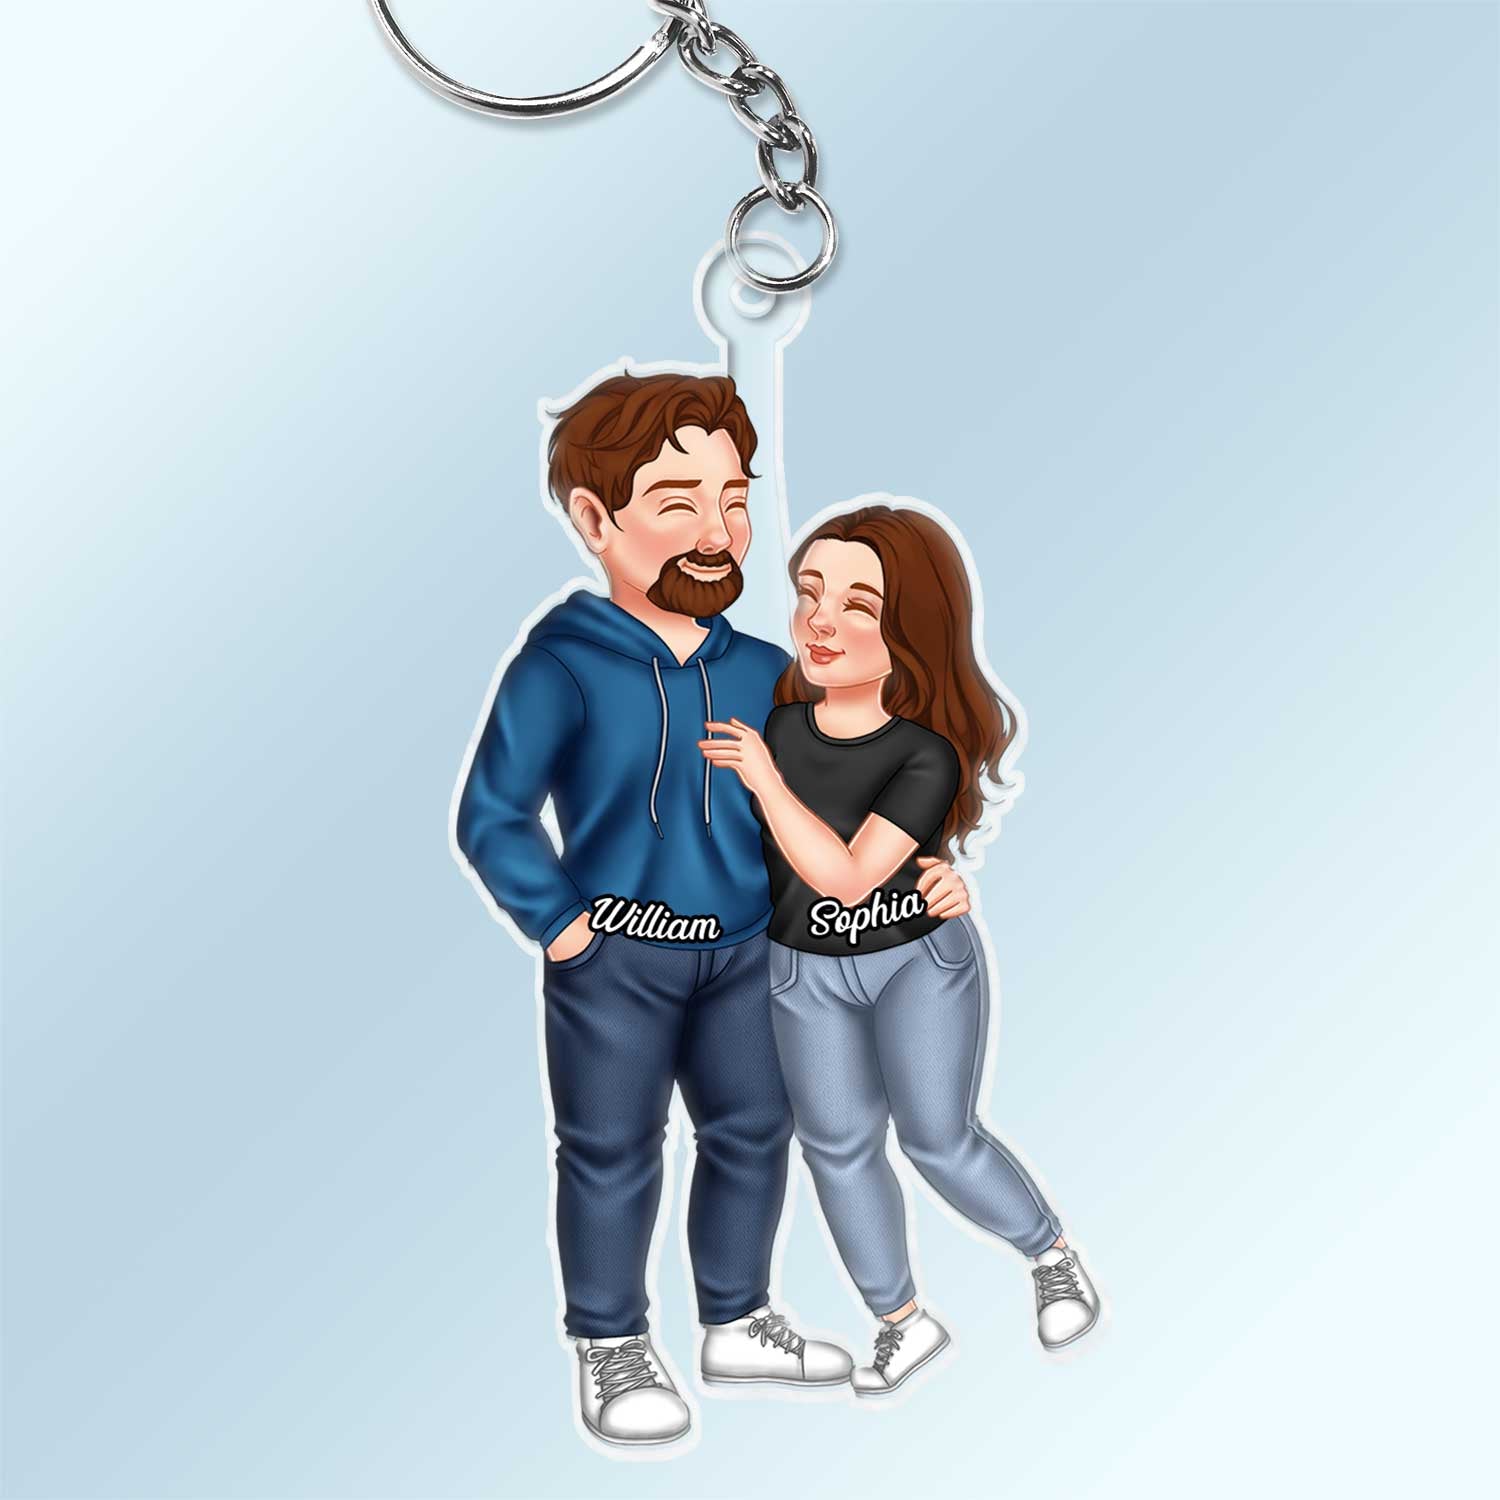 Arm In Arm Couple - Loving, Anniversary Gift For Couples, Husband, Wife - Personalized Cutout Acrylic Keychain